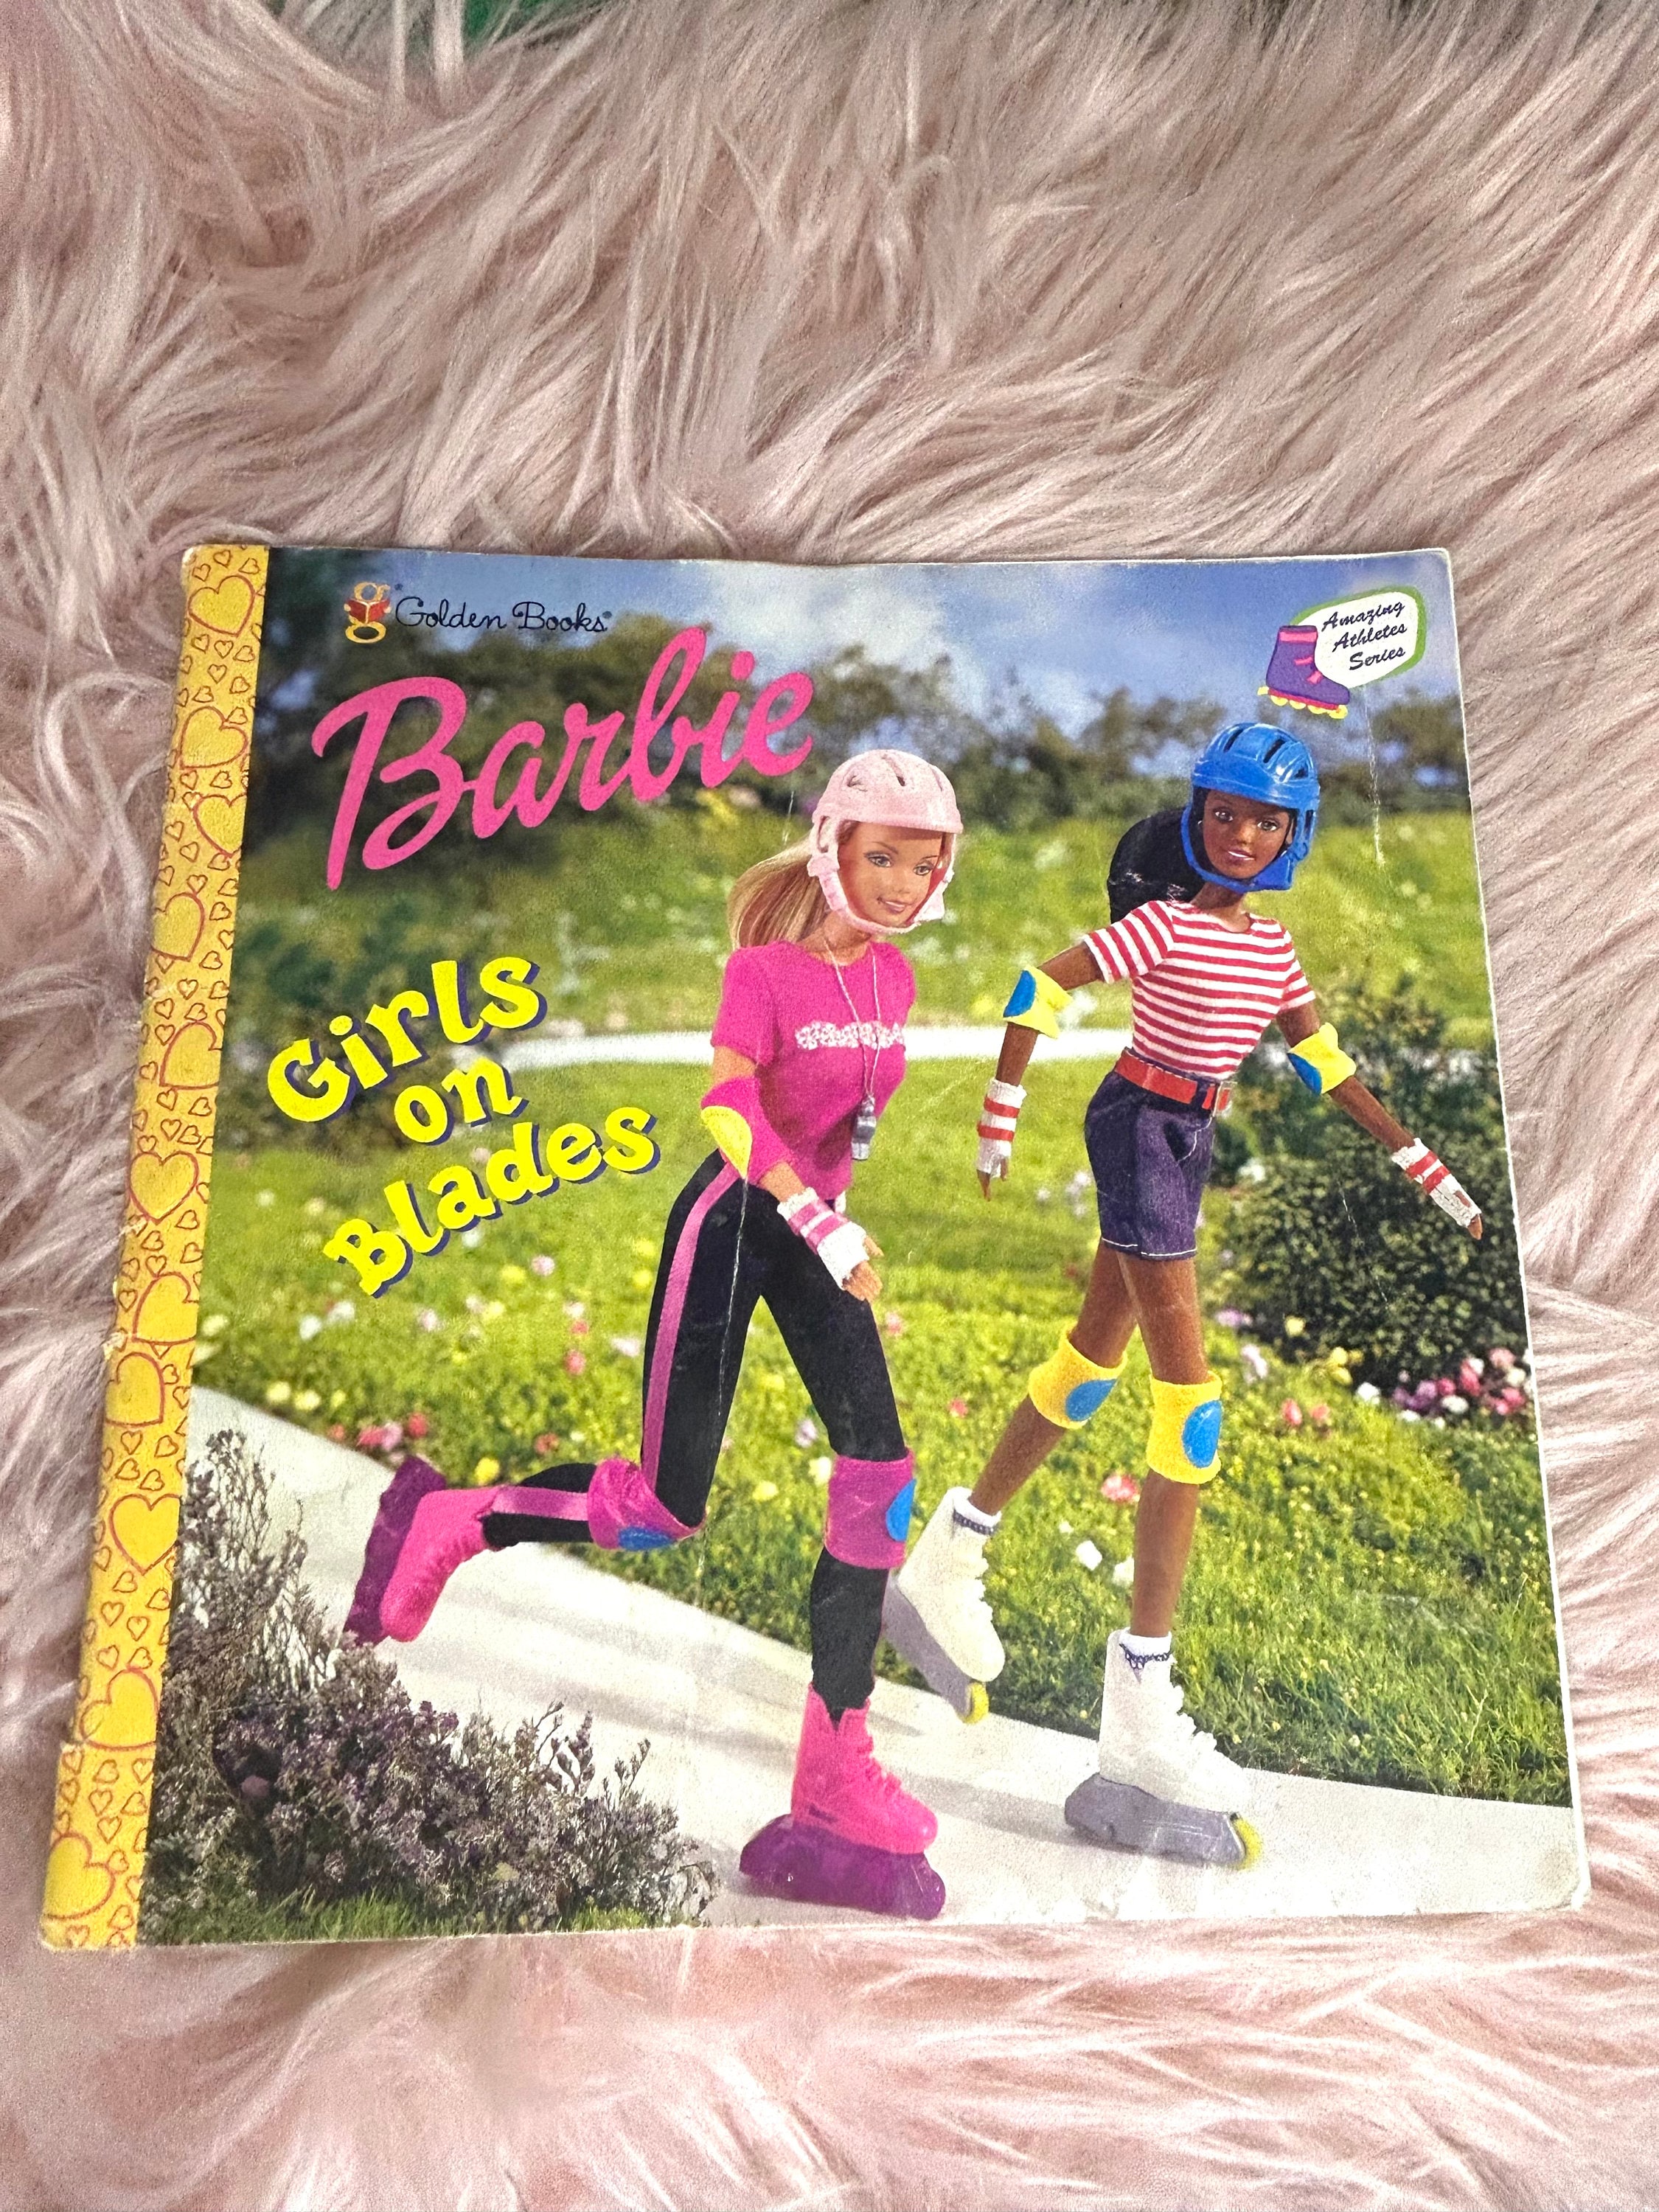 Barbie Dolls for sale editorial photography. Image of girls - 232249082